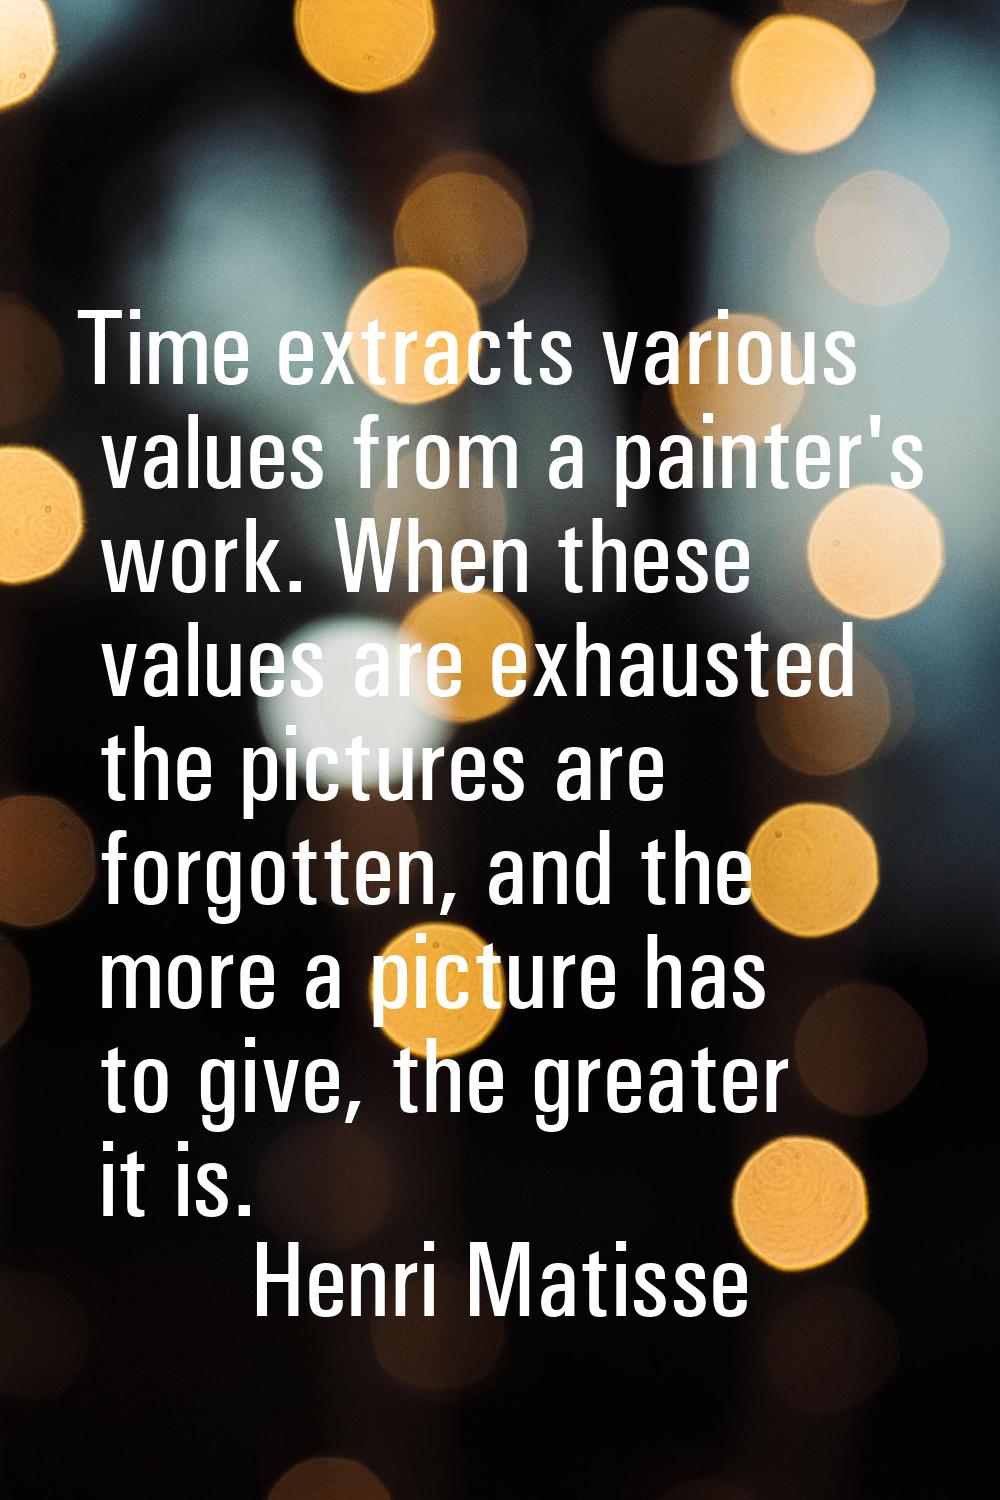 Time extracts various values from a painter's work. When these values are exhausted the pictures ar